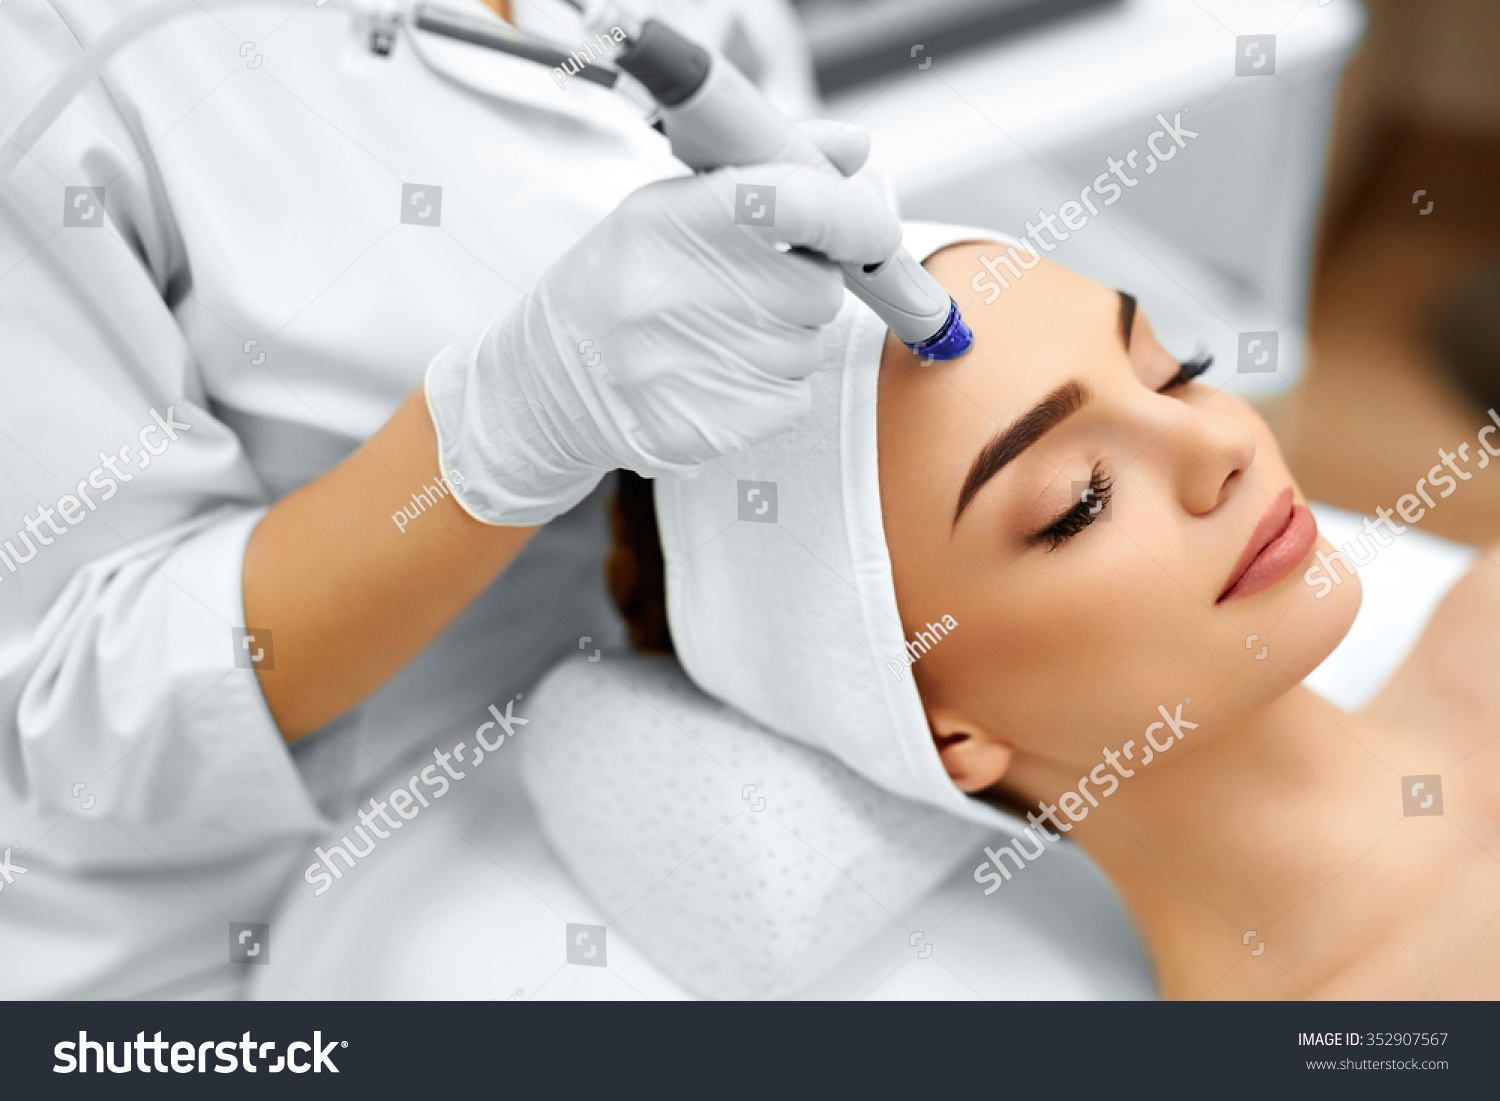 Face Skin Care. Close-up Of Woman Getting Facial Hydro Microdermabrasion Peeling Treatment At Cosmetic Beauty Spa Clinic. Hydra Vacuum Cleaner. Exfoliation, Rejuvenation And Hydratation. Cosmetology.  #352907567